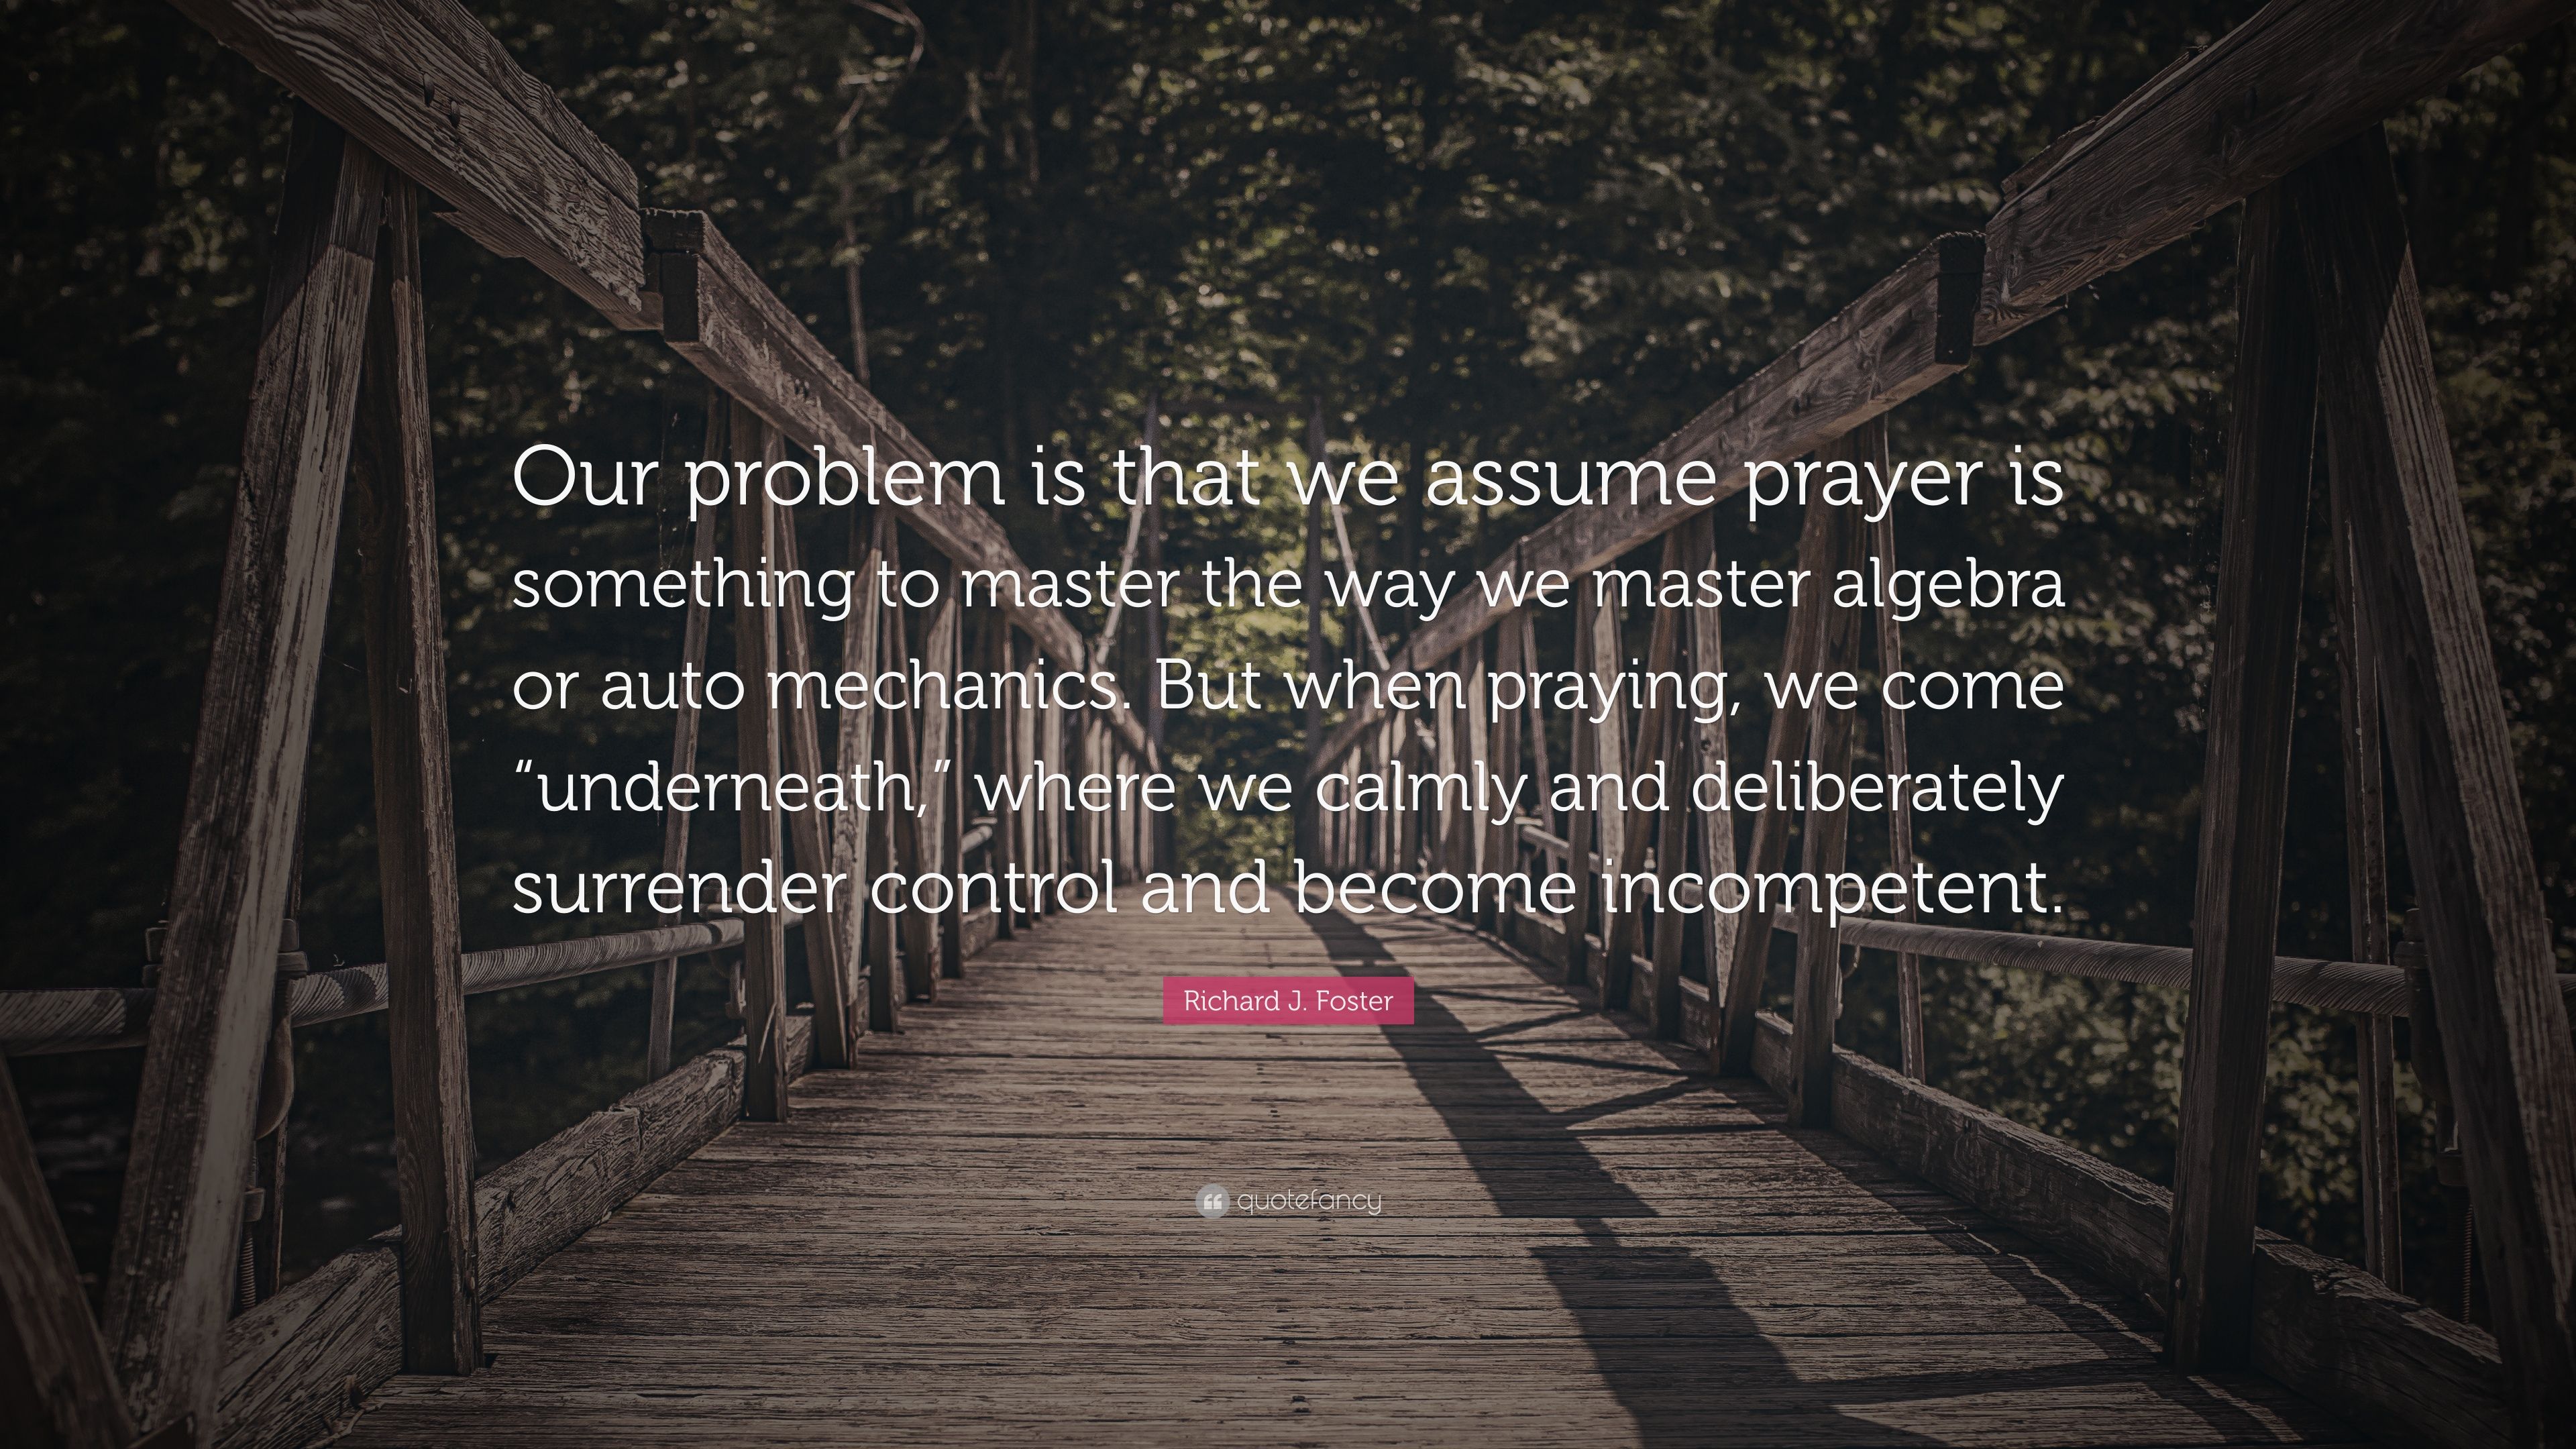 Richard J. Foster Quote: “Our problem is that we assume prayer is